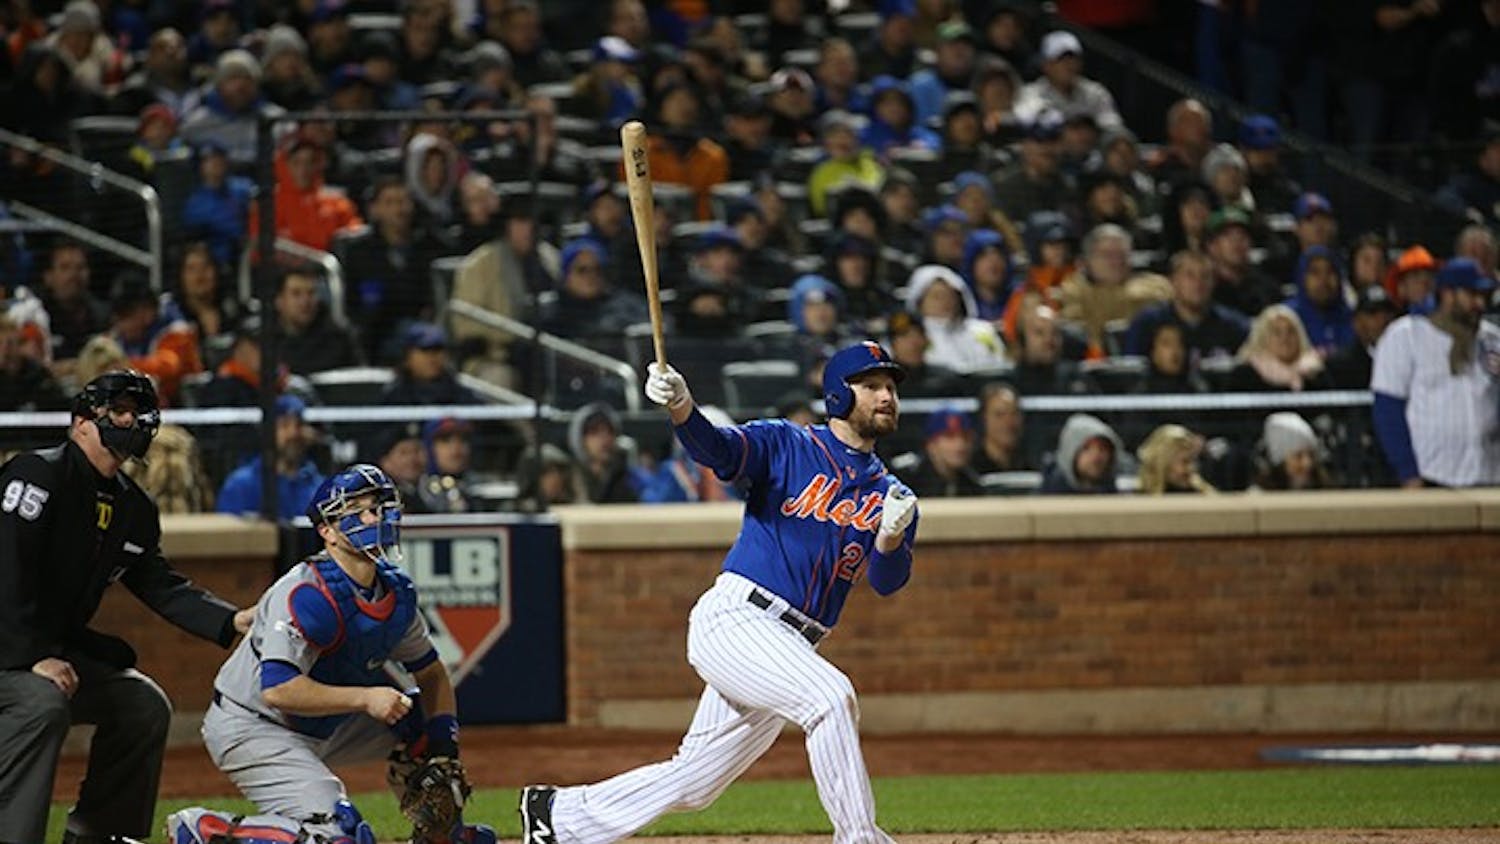 New York Mets second baseman Daniel Murphy (28) watches his two-run home run in the first inning Game 2 of the National League Championship Series playoff Sunday, Oct. 18, 2015, at Citi Field in New York. (Brian Cassella/Chicago Tribune/TNS) 